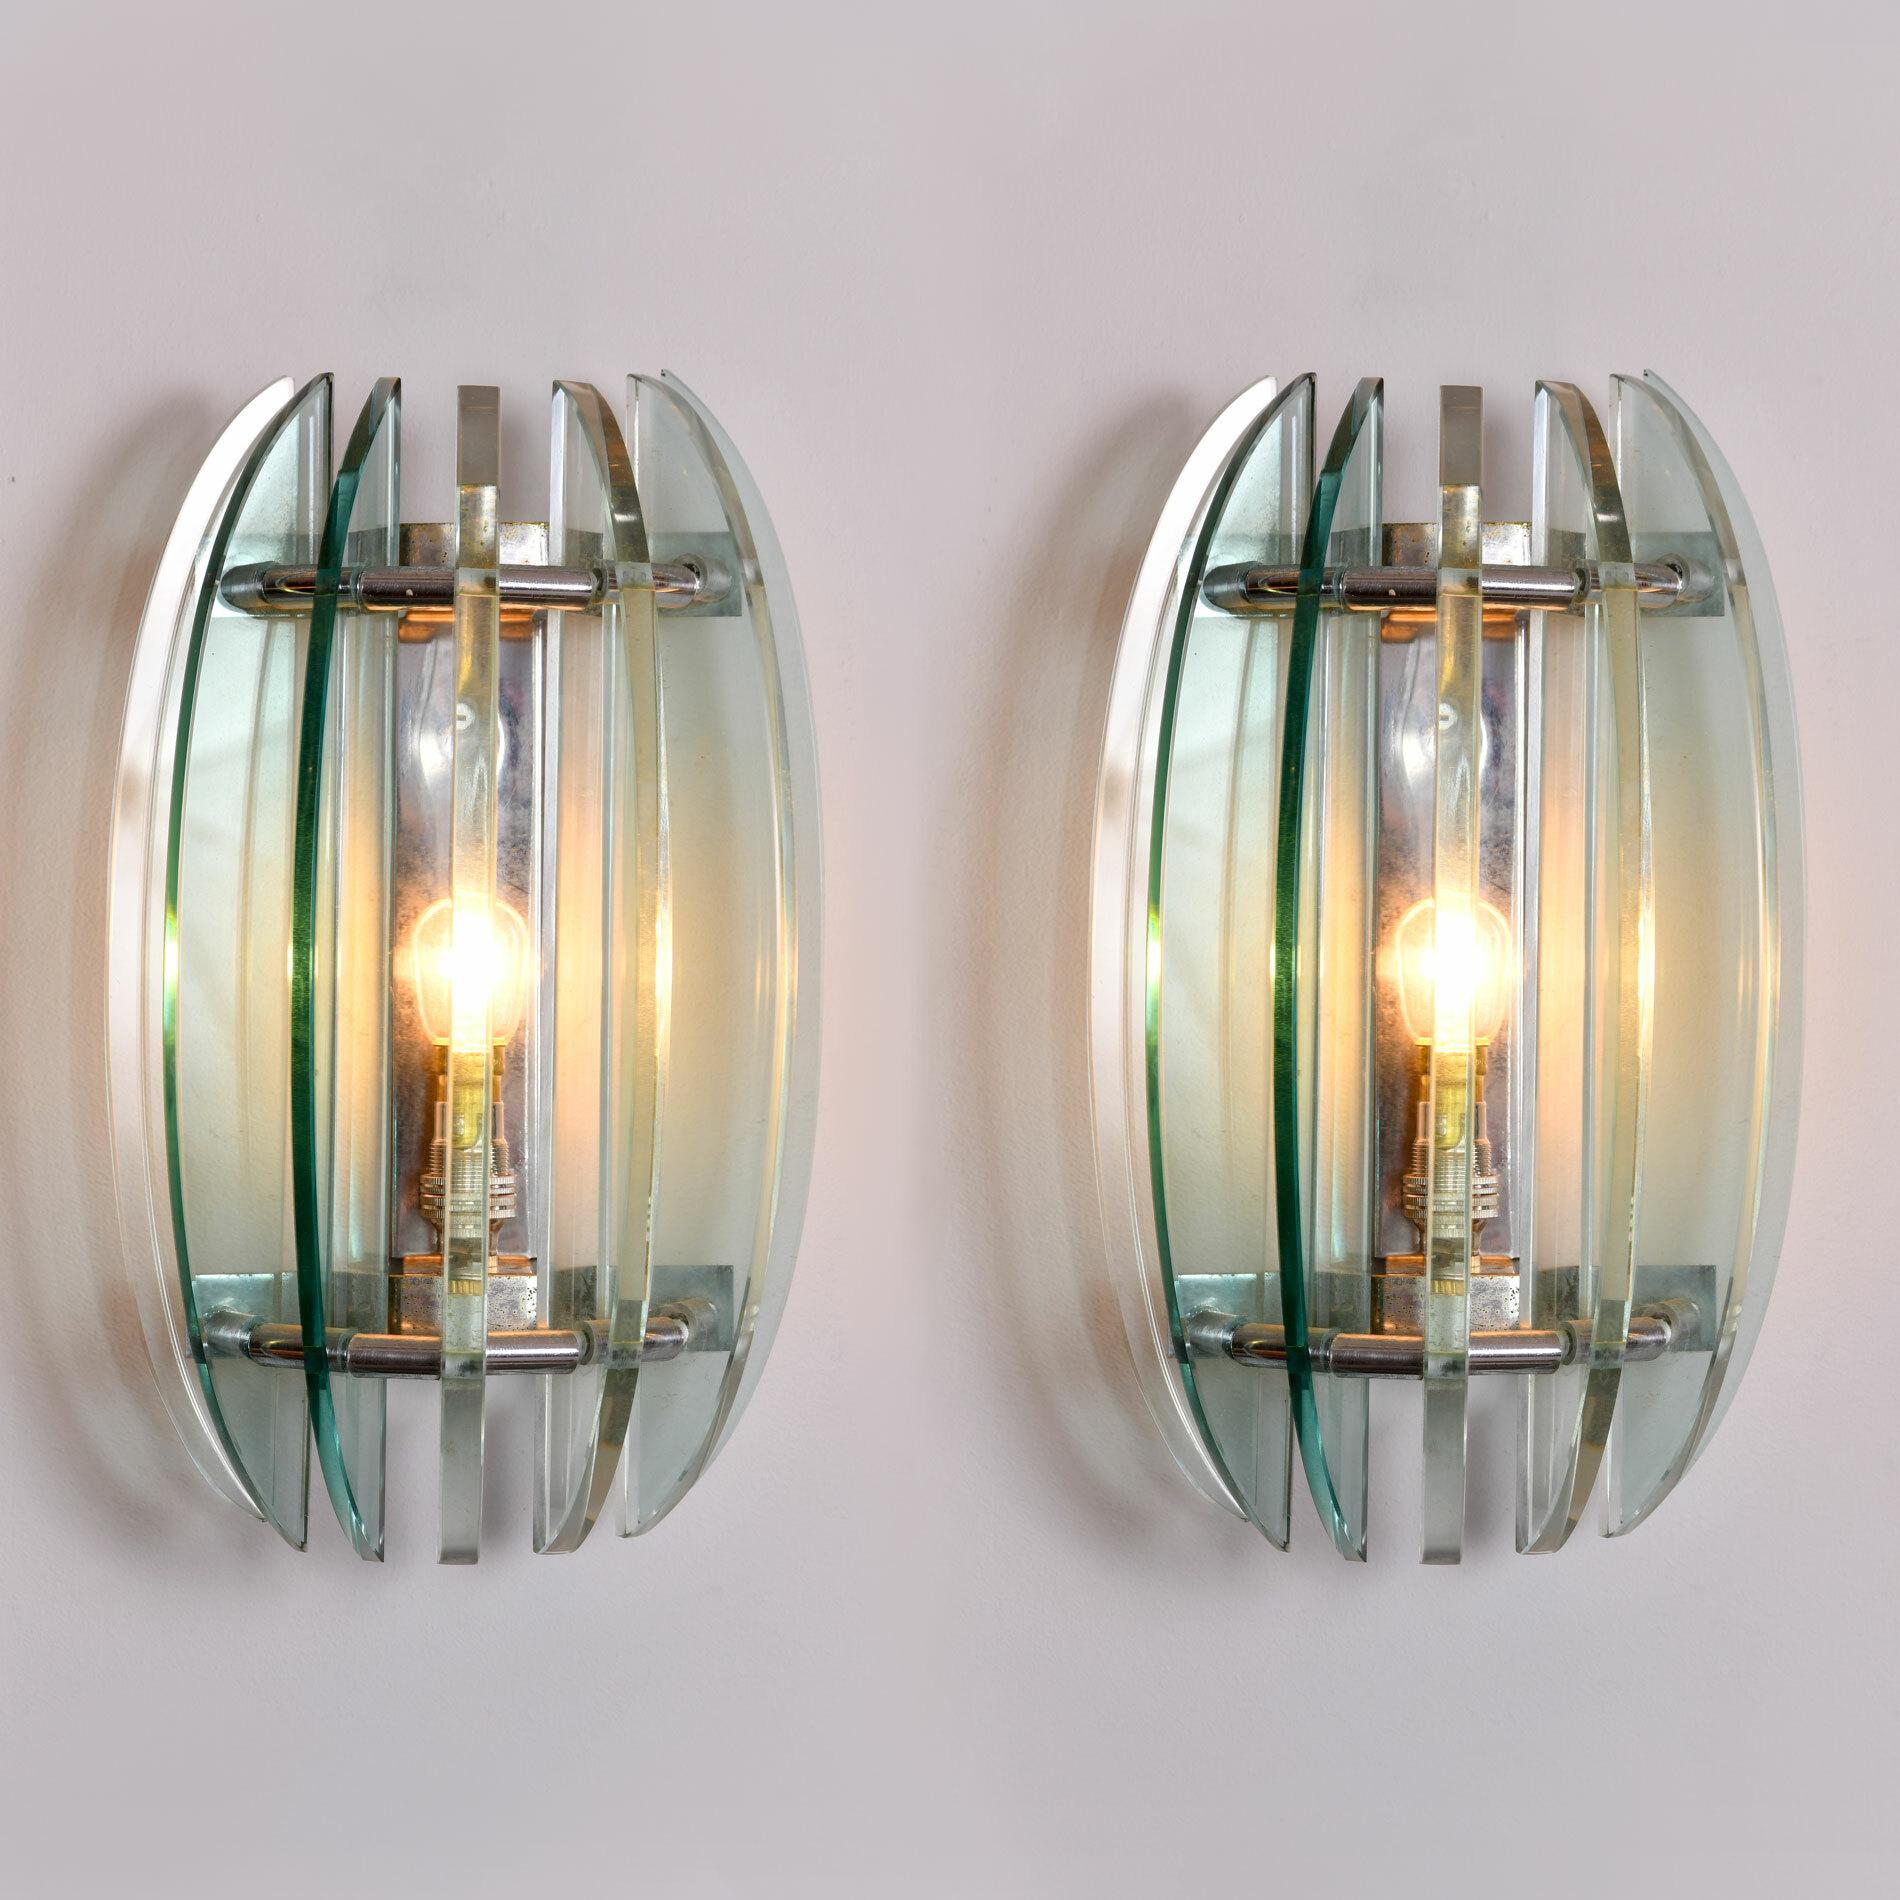 Pair of wall lights with alternating pale green and clear crystal glass pieces projecting out from chrome backplate.